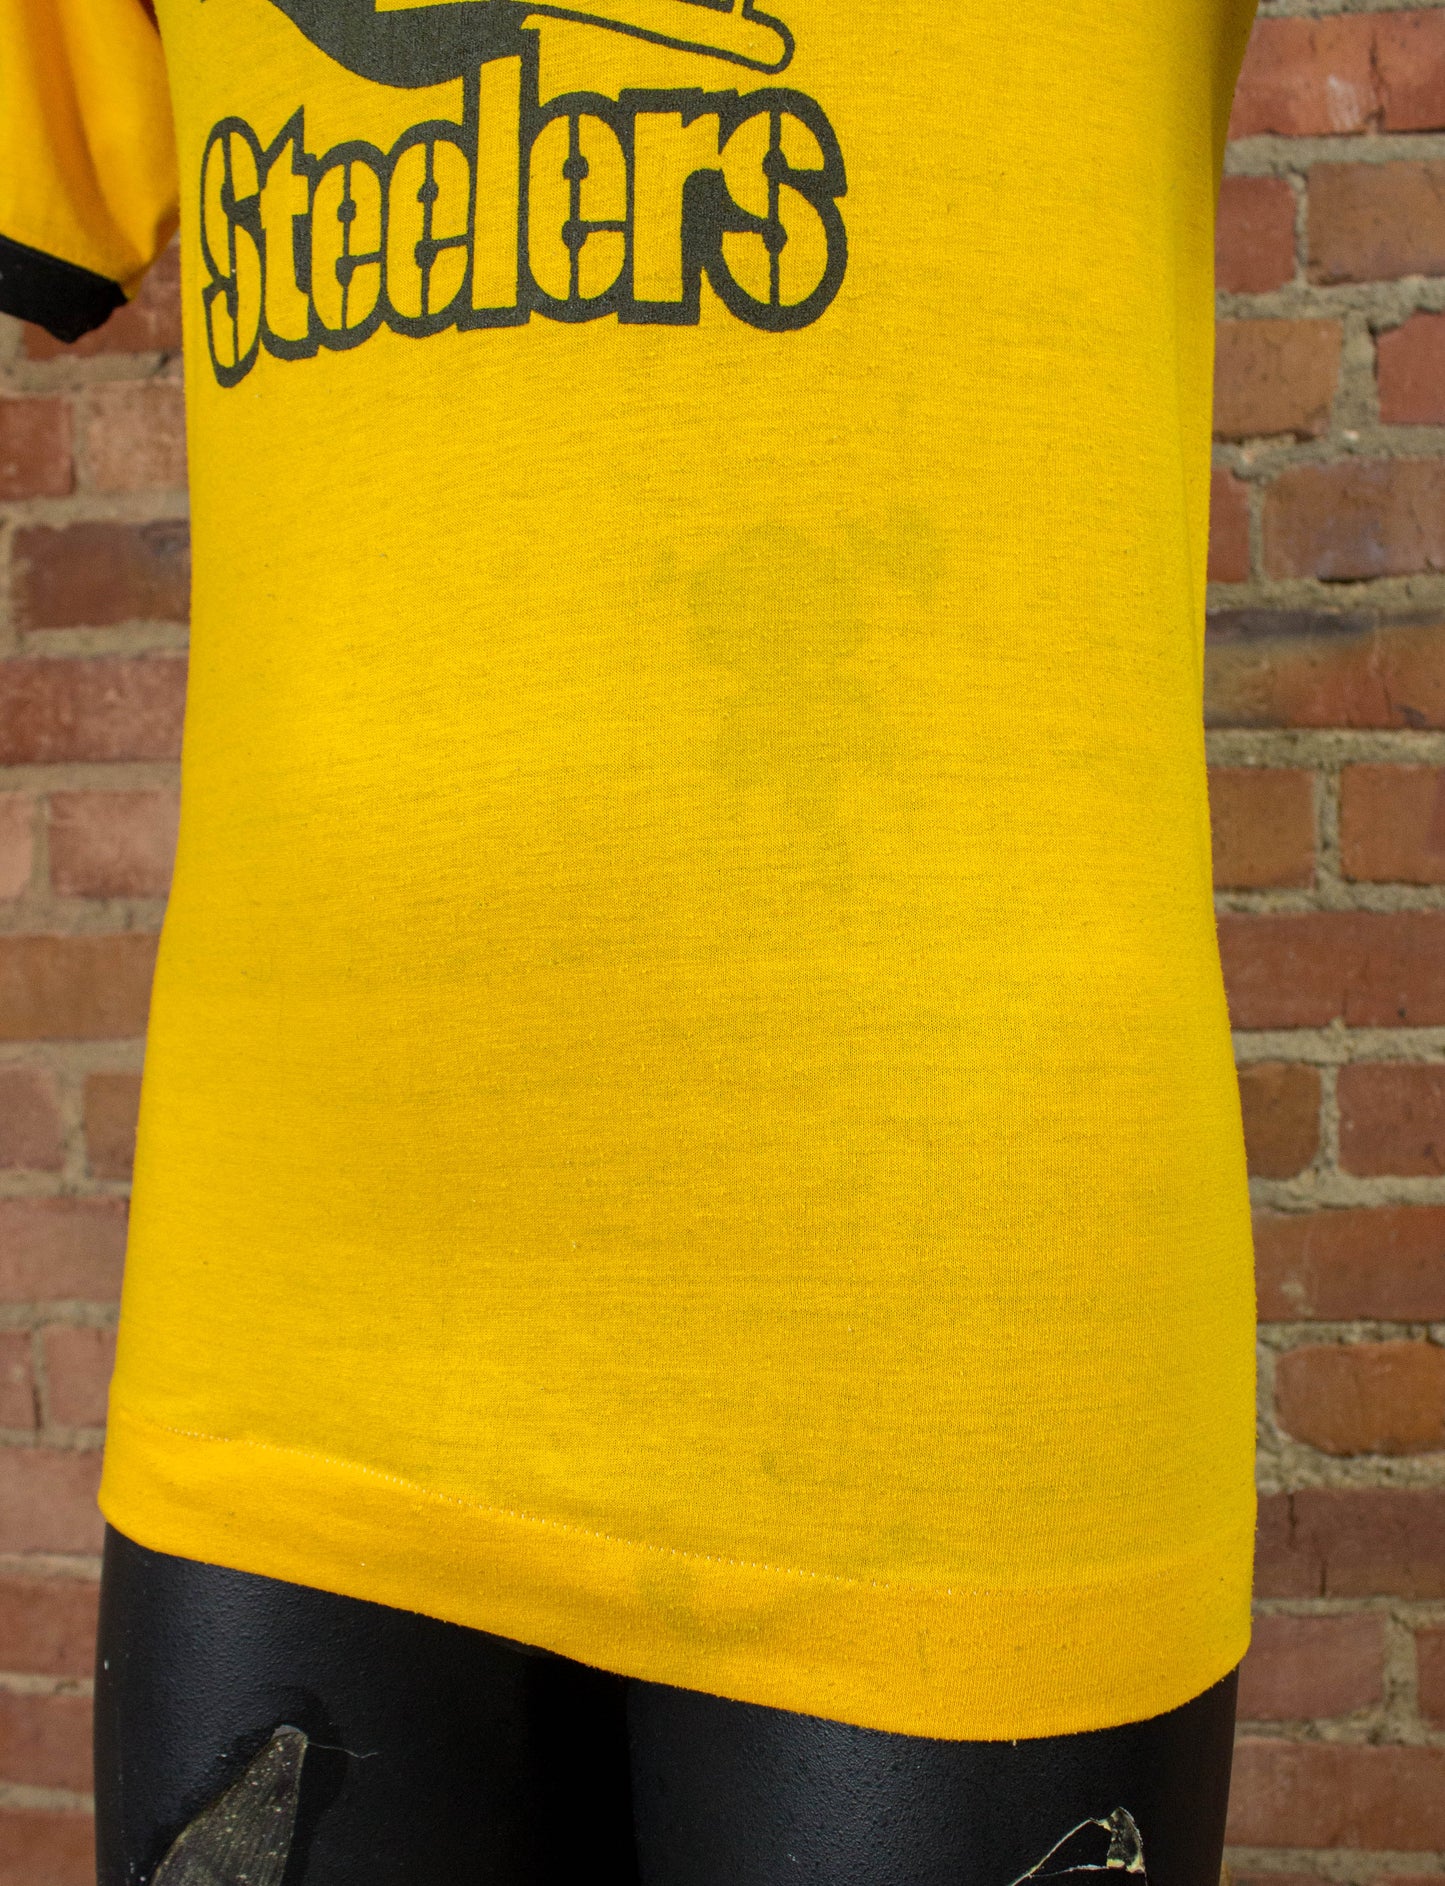 Vintage 70s Pittsburgh Steelers Black and Yellow Football Jersey Style Graphic T Shirt Unisex Small